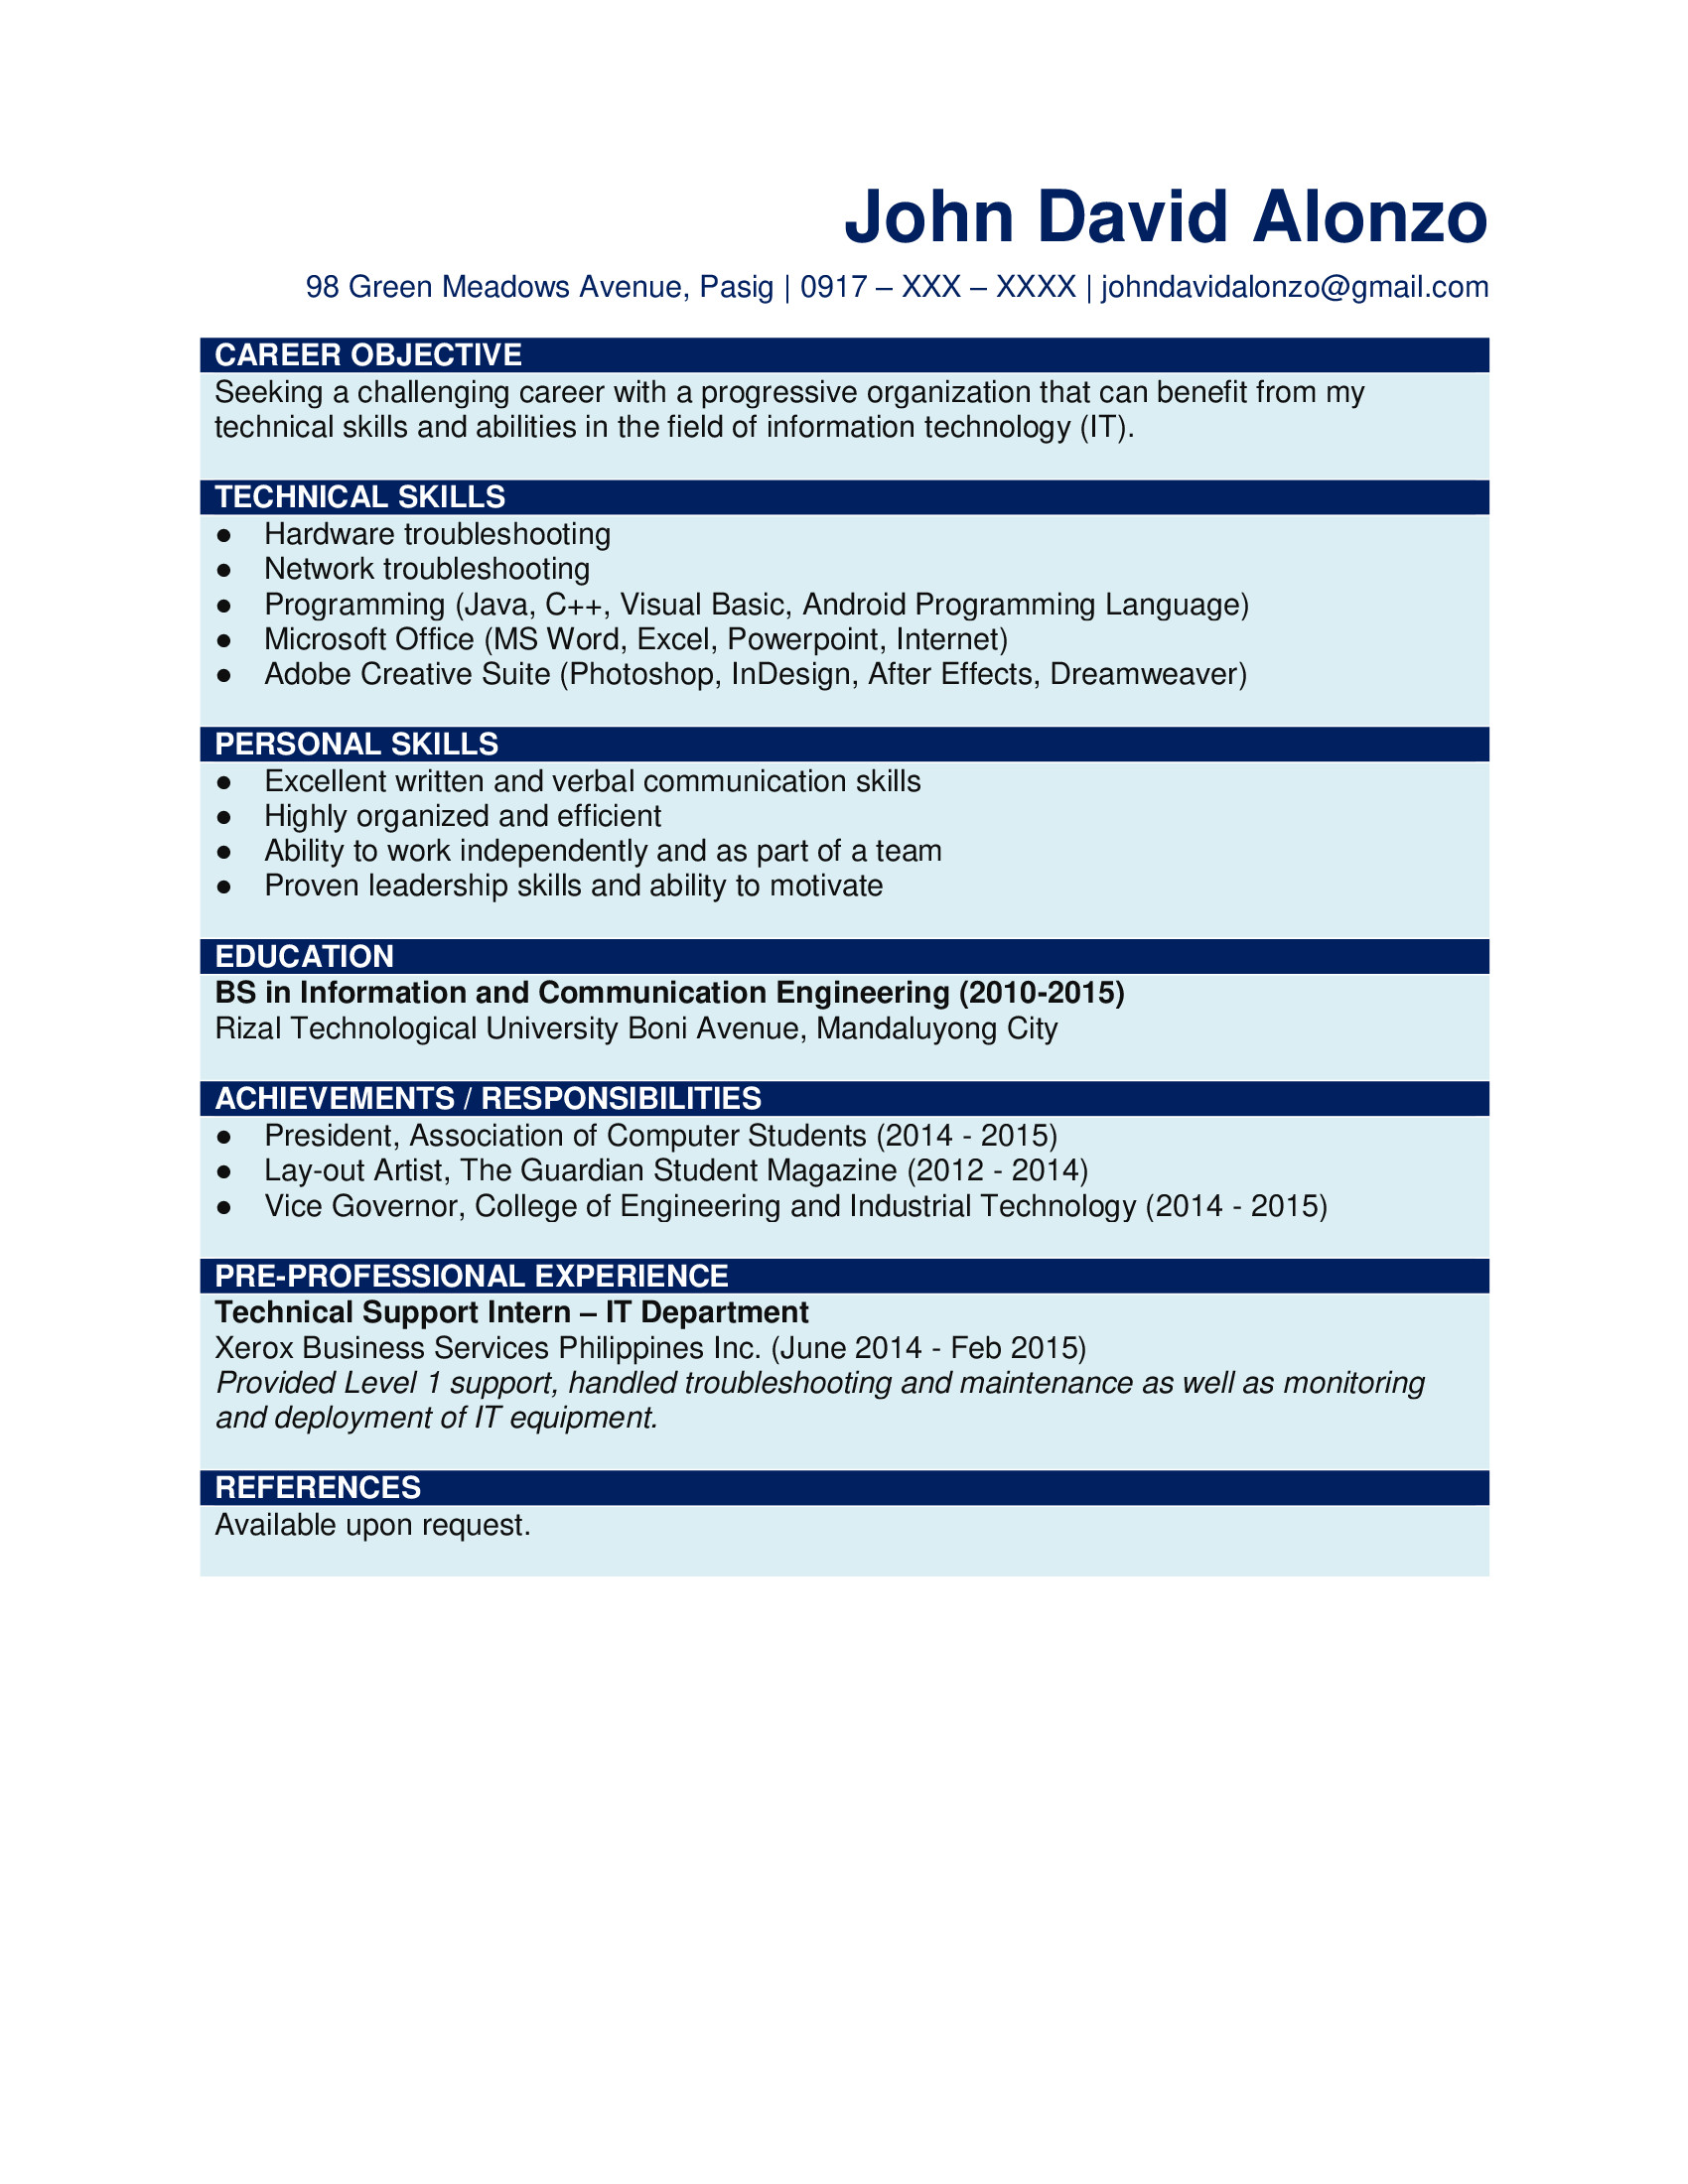 Sample Resume Right Out Of College Sample Resume formats for Fresh Graduates